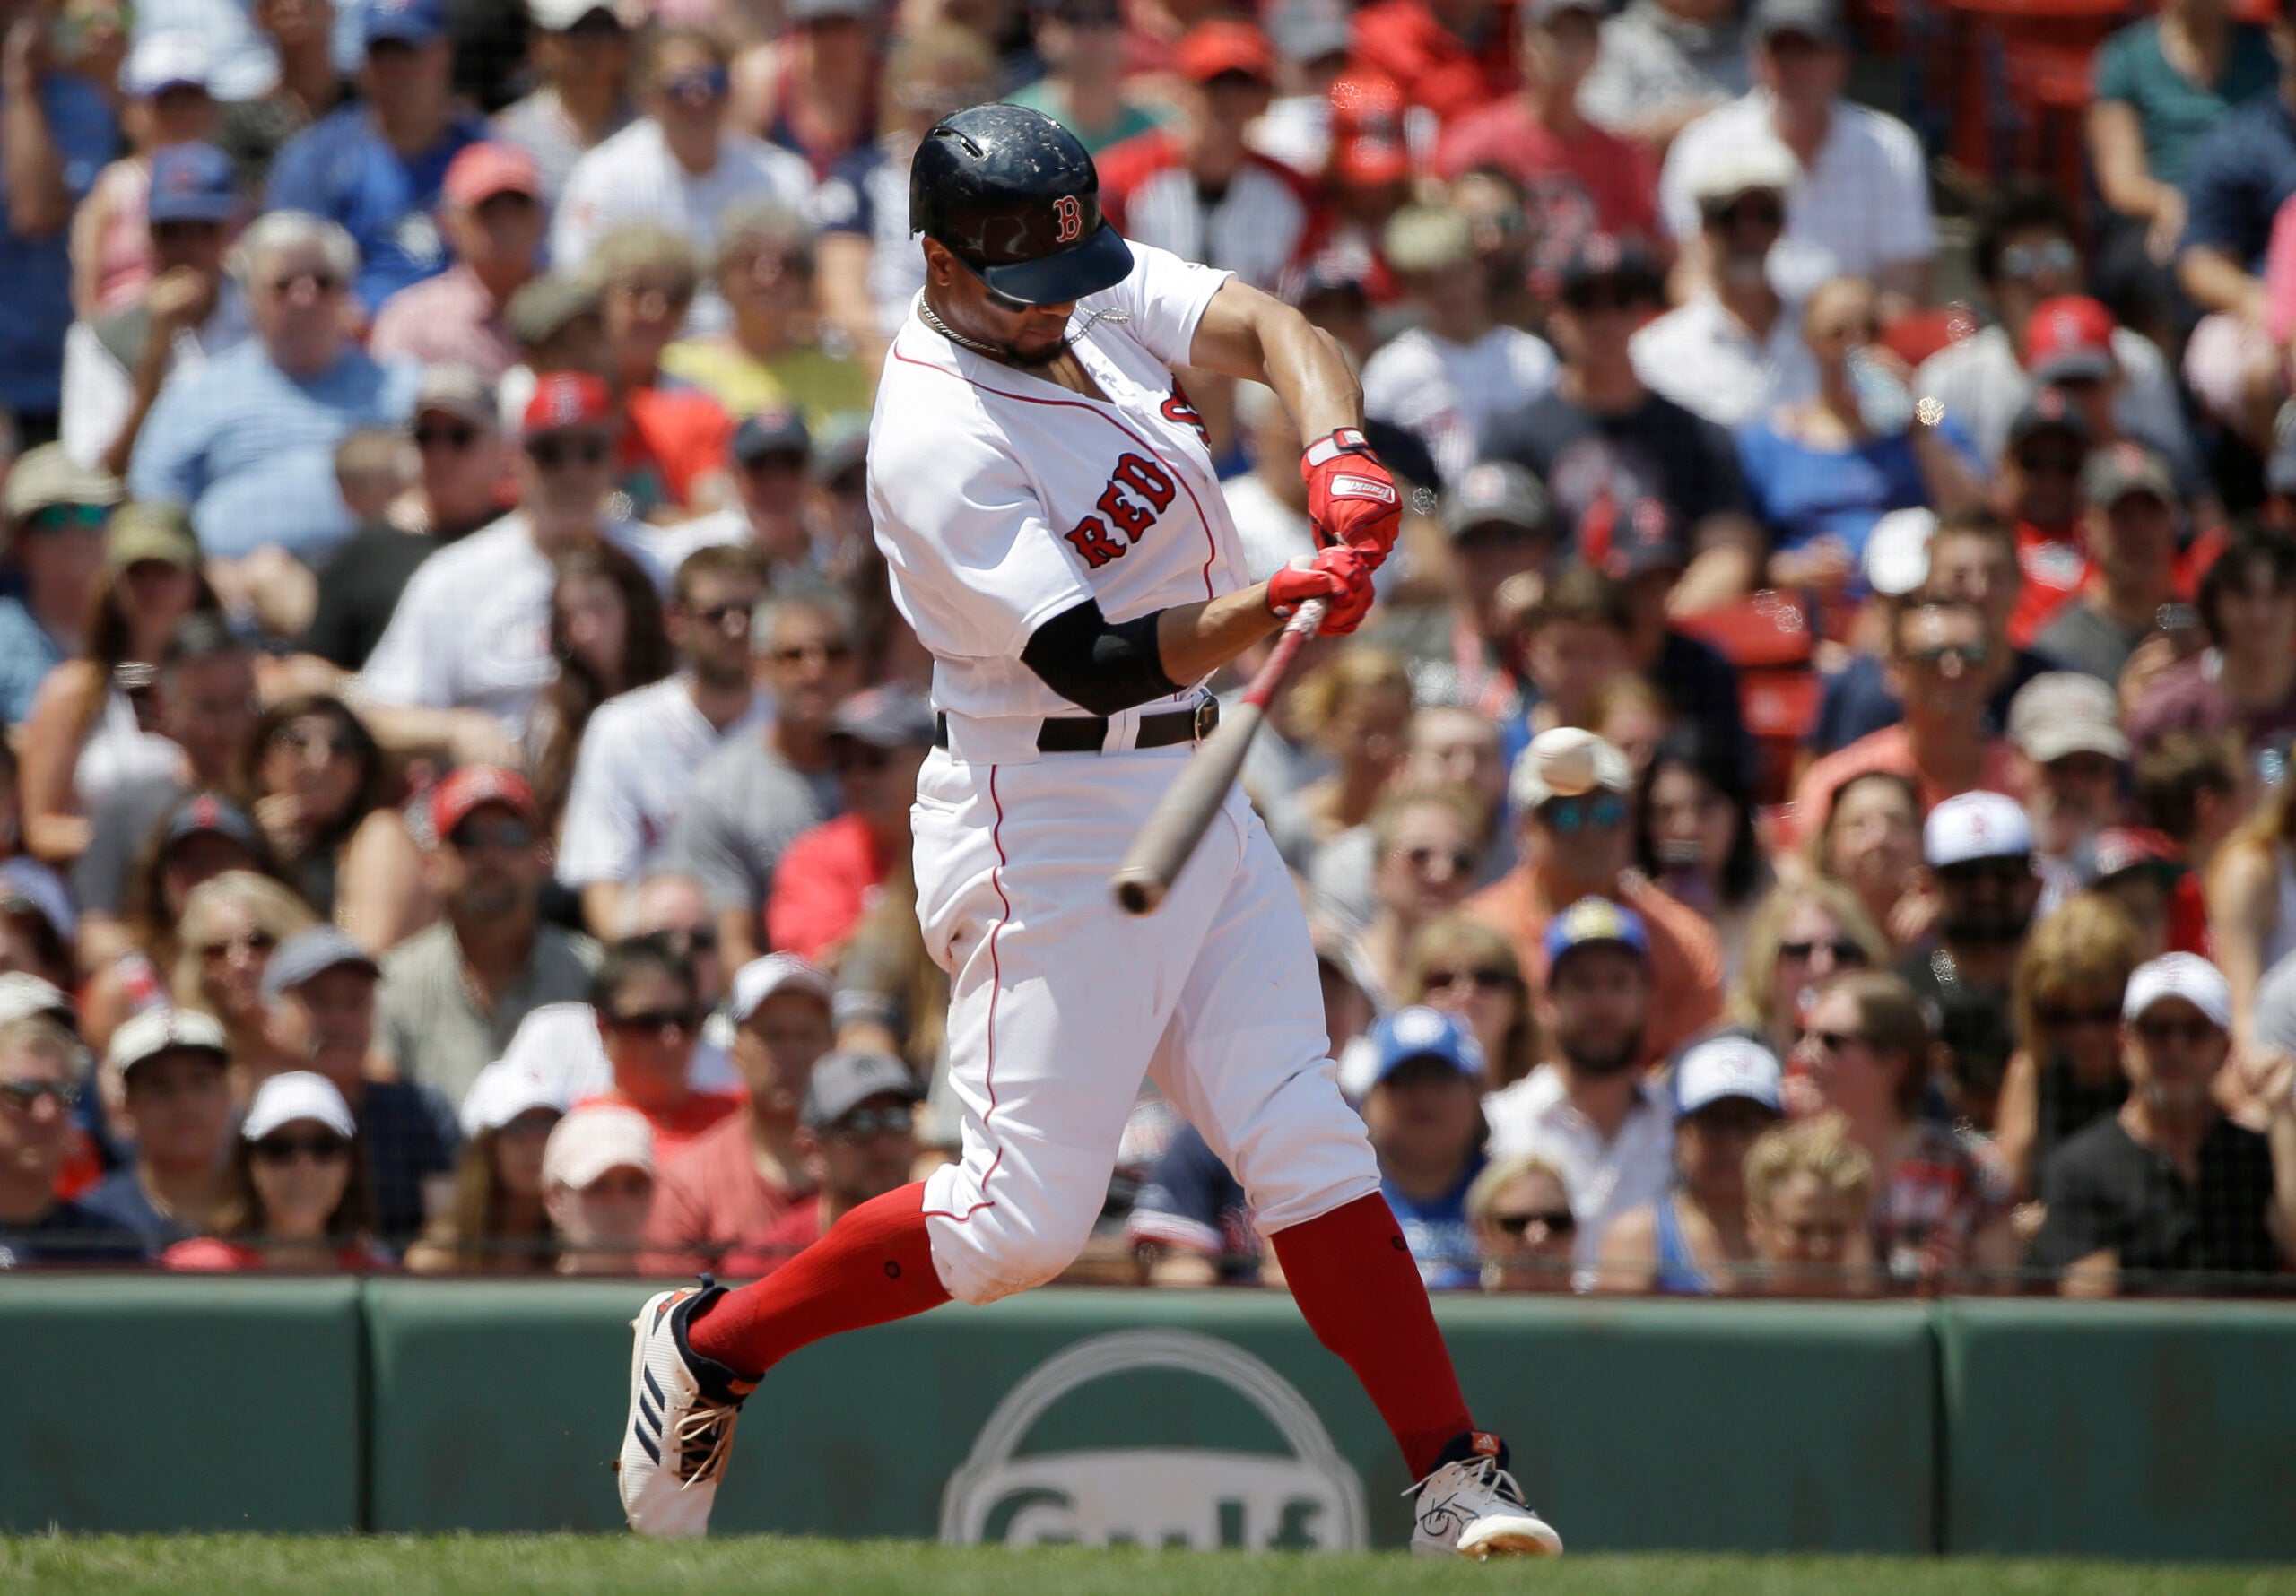 With another home run, Xander Bogaerts maintains his torrid pace